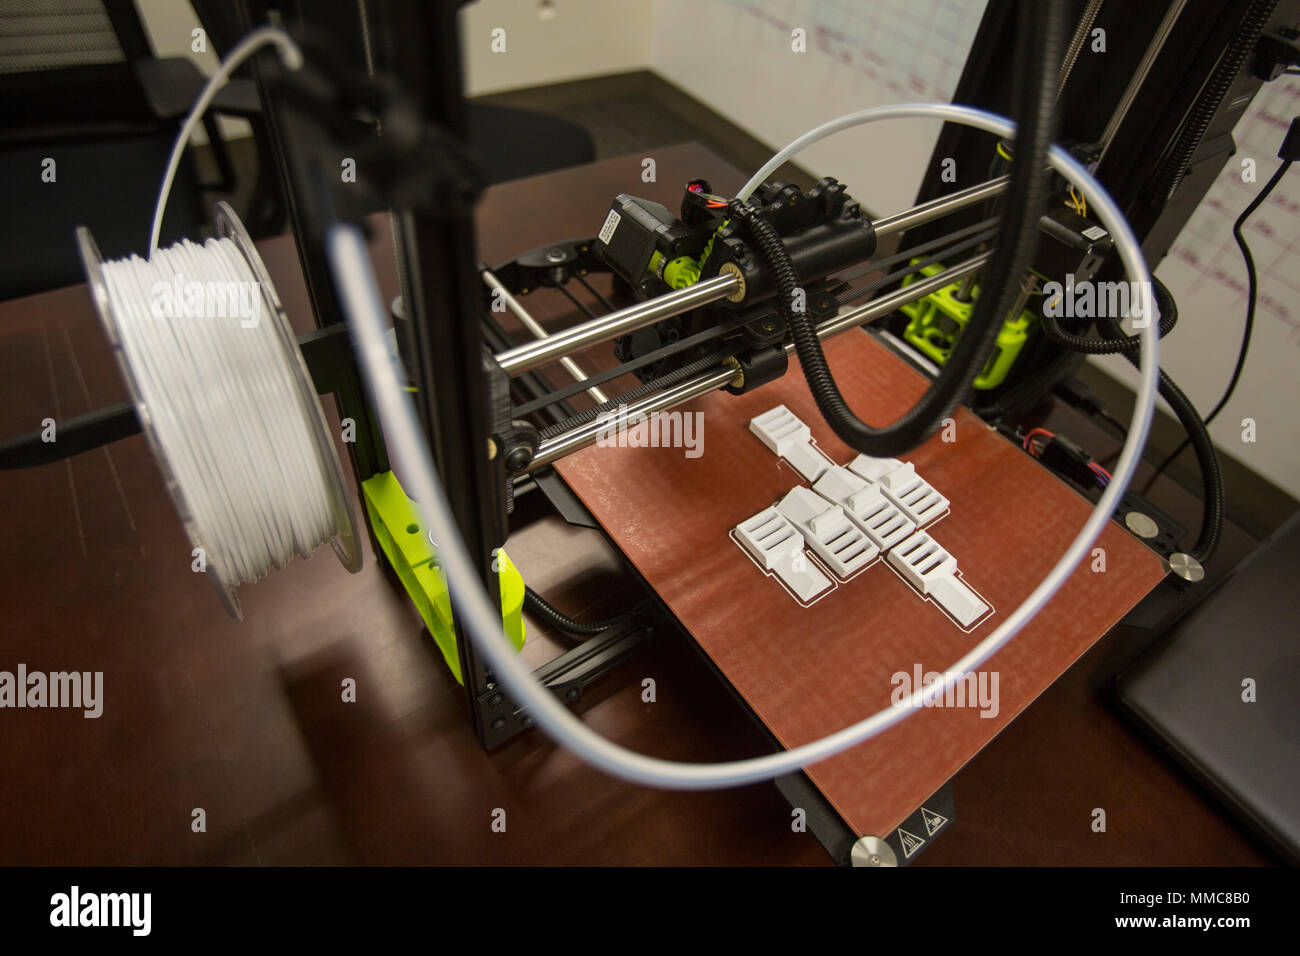 The 3-D printer and the finished layout of pack clips from 2nd Battalion, 8th Marine Regiment at Camp Lejeune, N.C., Oct. 6, 2017. 2/8 is the first infantry battalion in the United States Marine Corps to utilize a 3-D printer to ensure battalion readiness in the event of equipment malfunctions. (U.S. Marine Corps photo by Lance Cpl. Ashley McLaughlin) Stock Photo